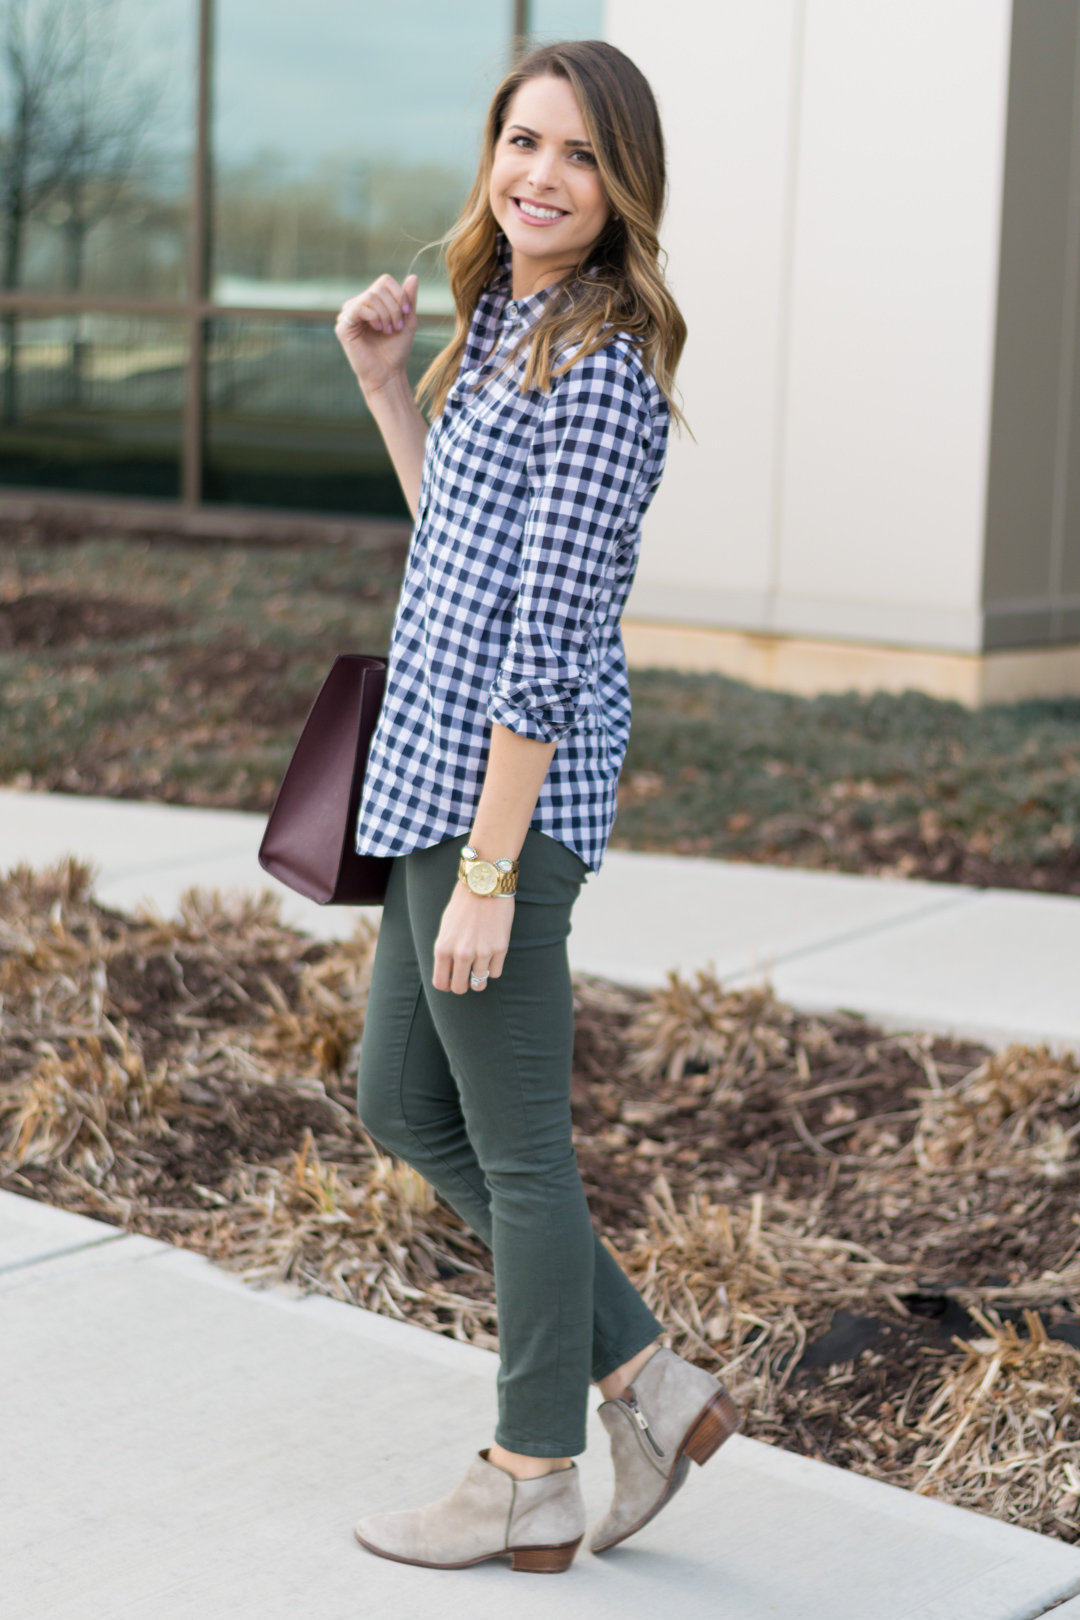 Wear to Work: Gingham - The Styled Press